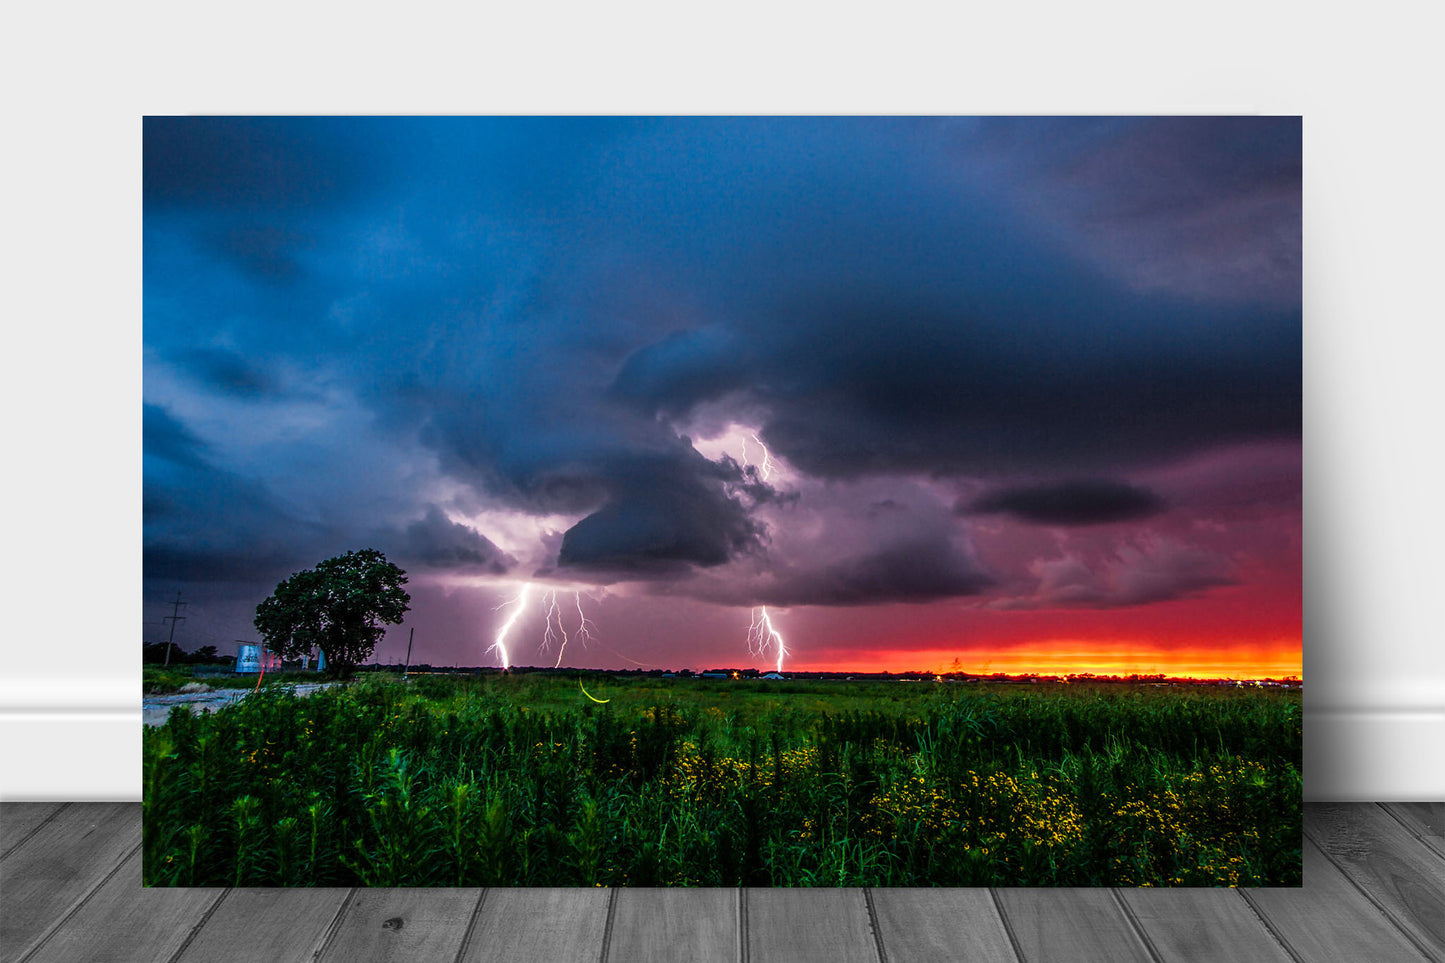 Storm metal print on aluminum of lightning strikes as a firefly whirls about on a stormy summer evening in Oklahoma by Sean Ramsey of Southern Plains Photography.